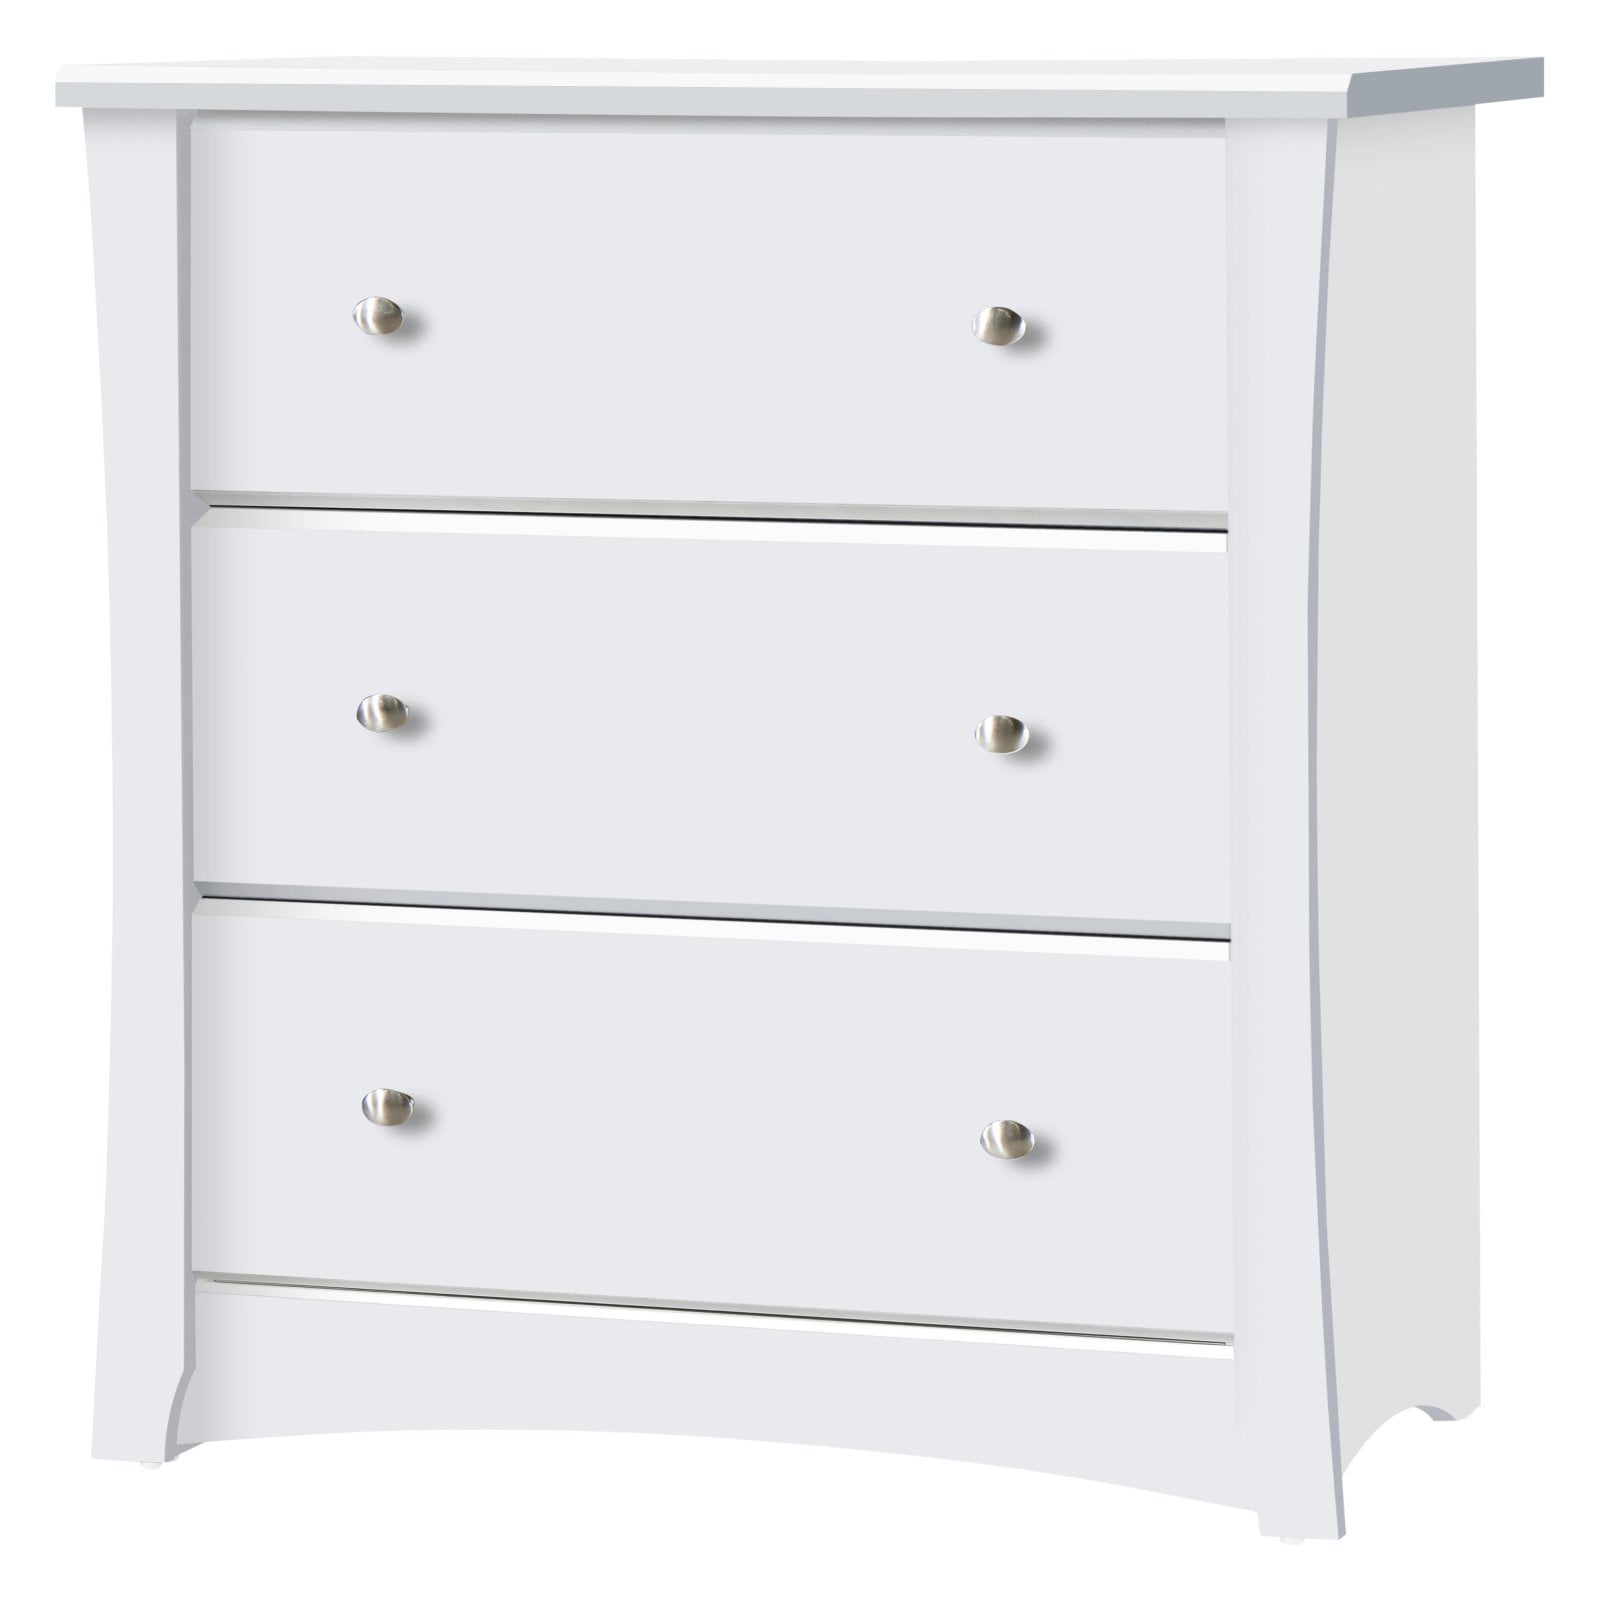 Kids Room Cherry Kids Bedroom Dresser With 3 Drawers Graco Kendall